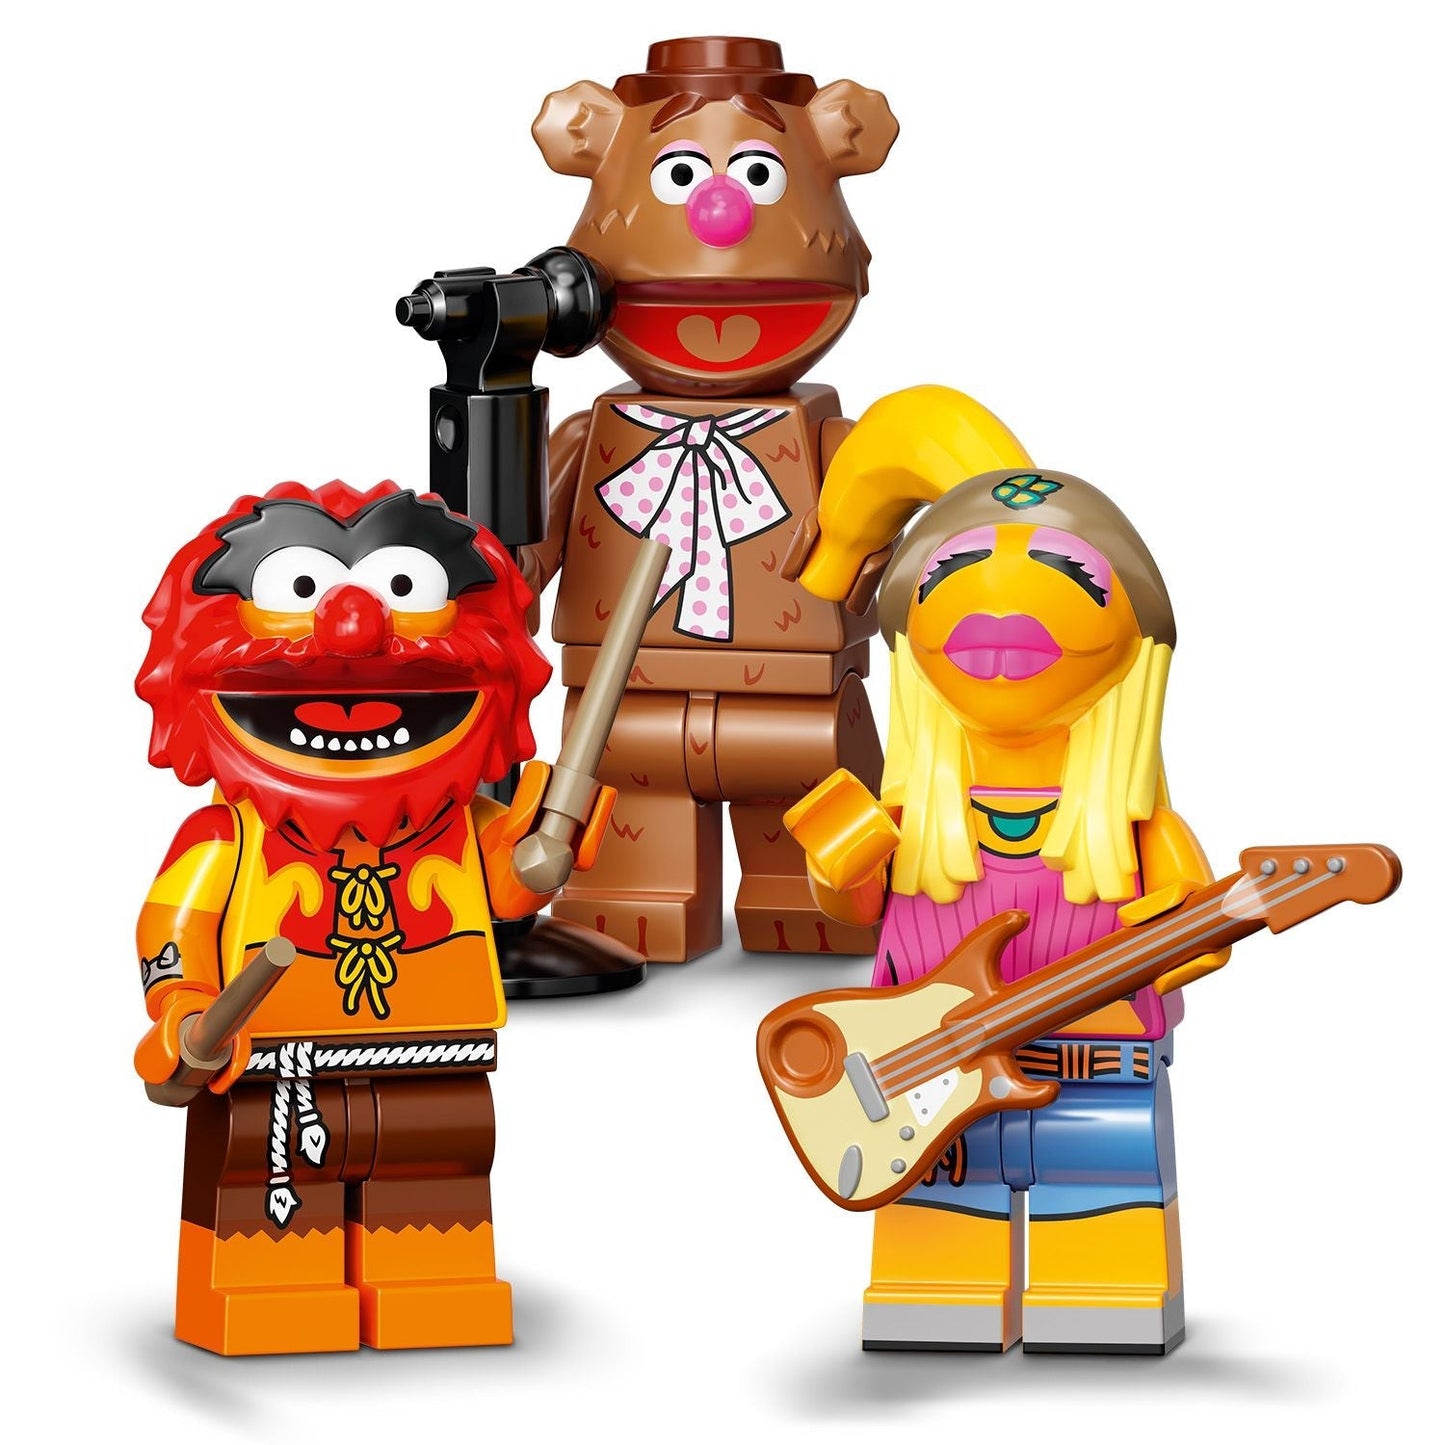 71033 The Muppets (Retired) LEGO Collectible Minifigures